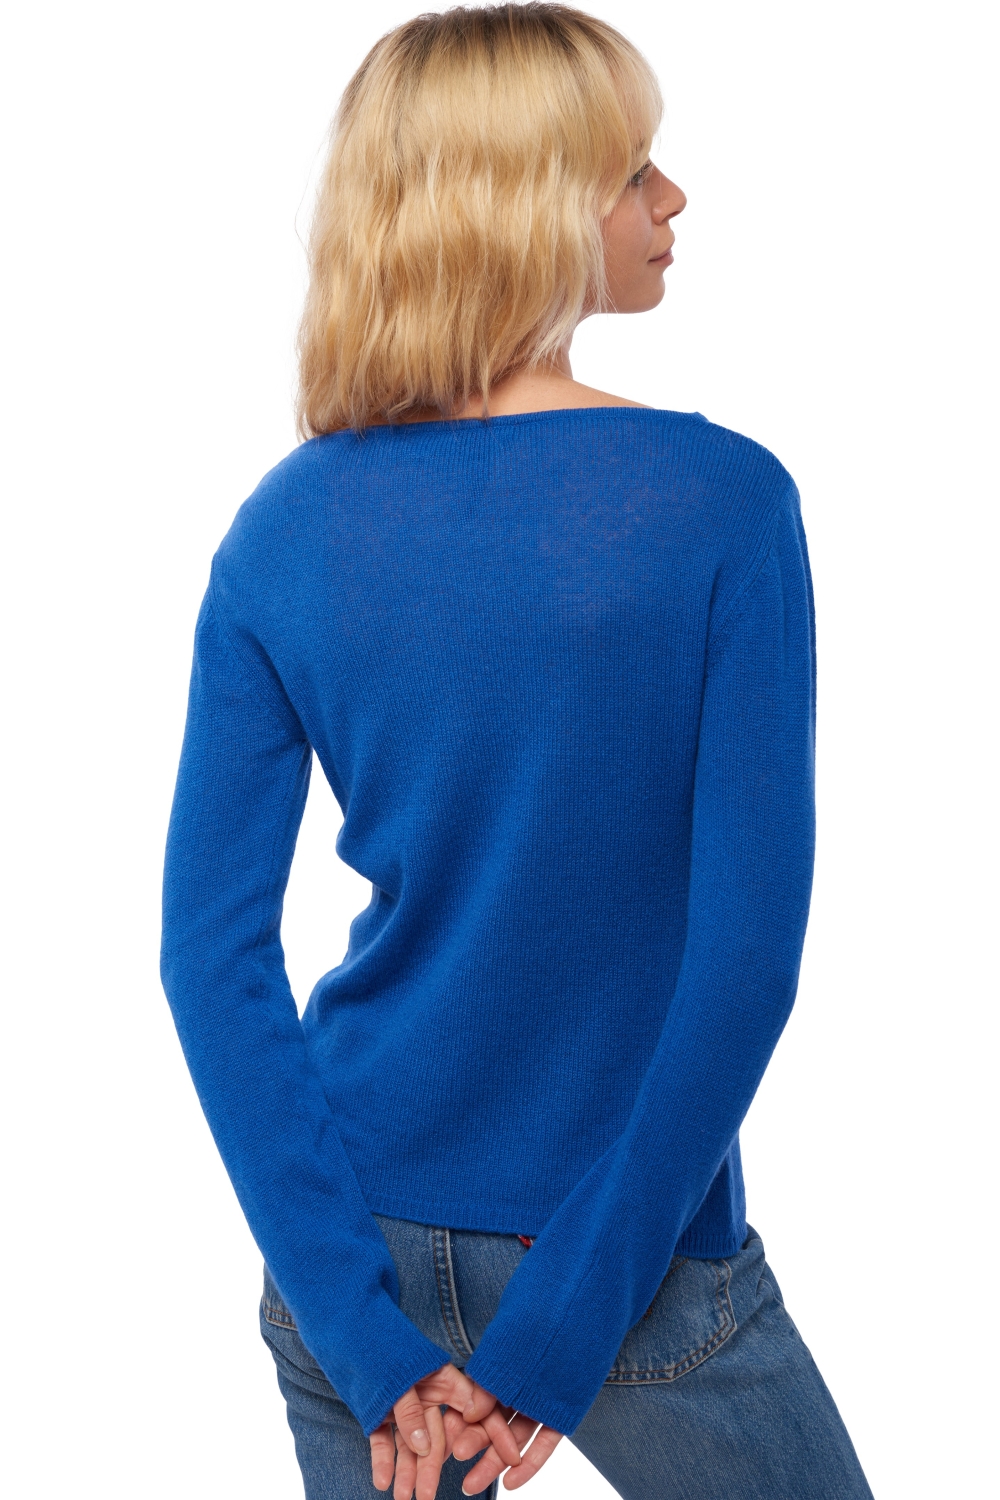 Cachemire pull femme col rond caleen bleu lapis xs